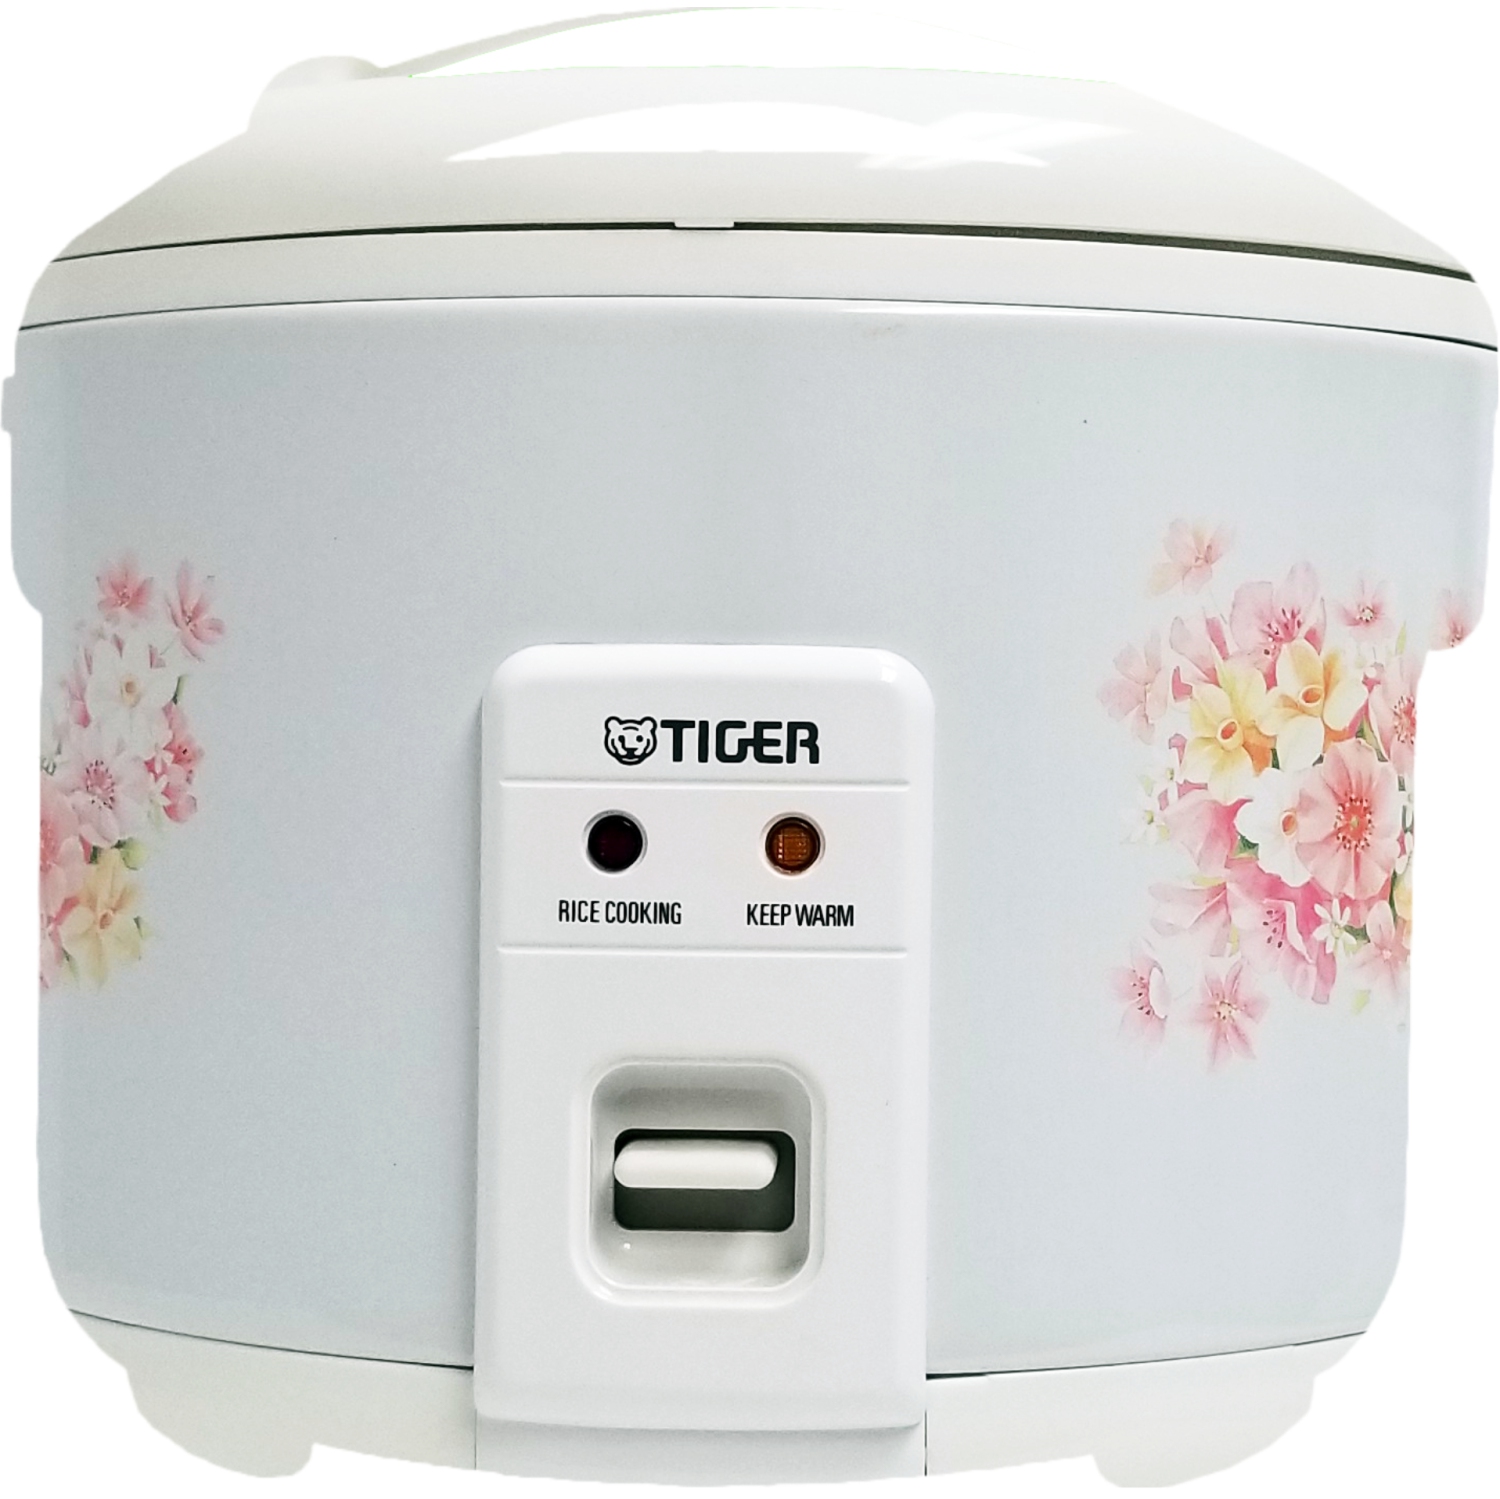 Tiger JNP-1500 Conventional Rice Cooker, 8 Cups - Made in Japan